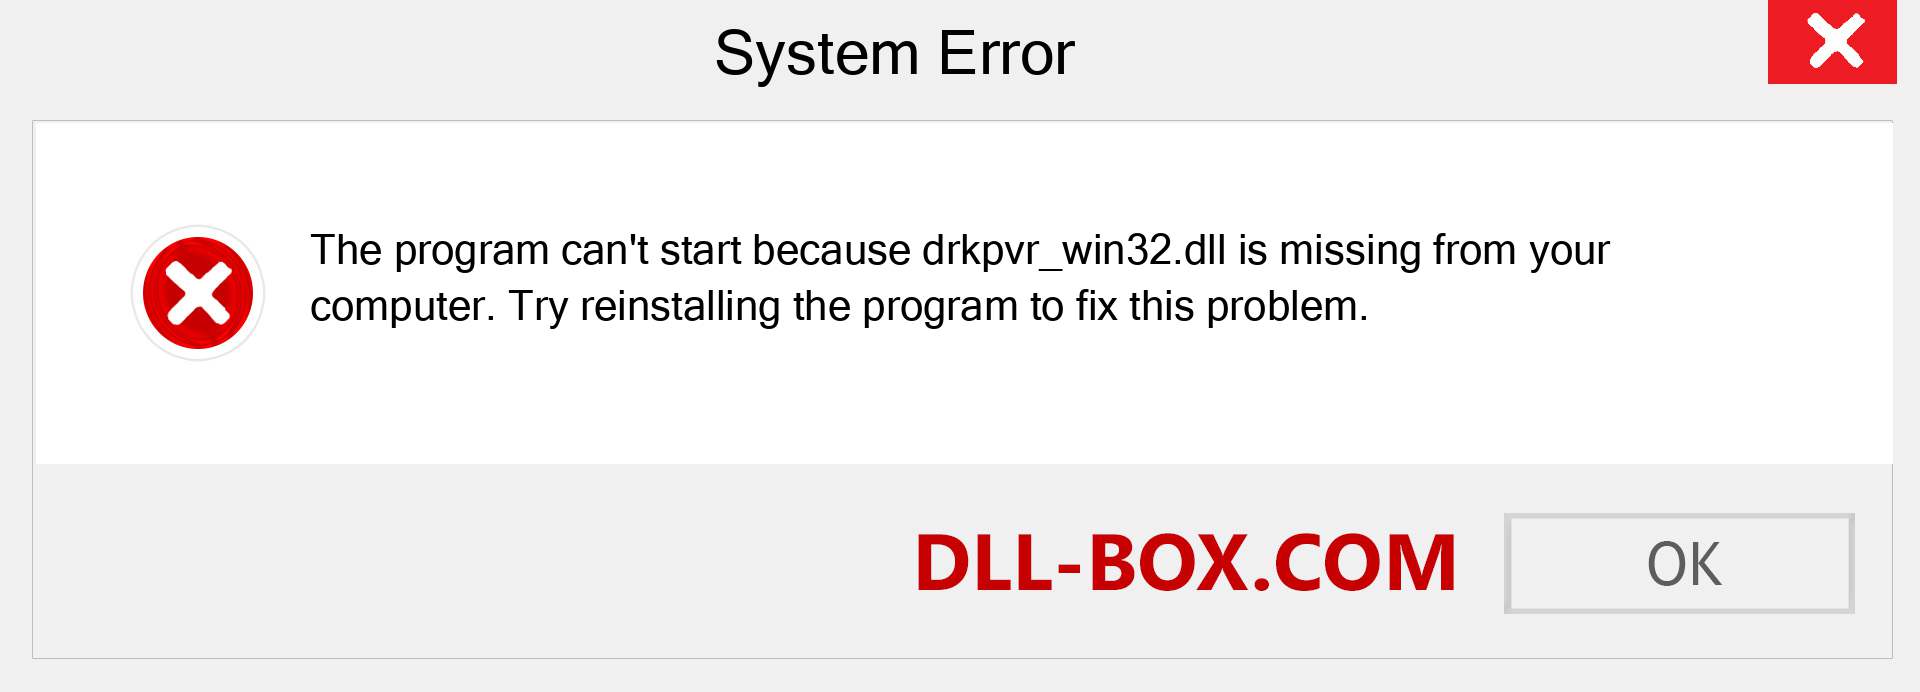  drkpvr_win32.dll file is missing?. Download for Windows 7, 8, 10 - Fix  drkpvr_win32 dll Missing Error on Windows, photos, images